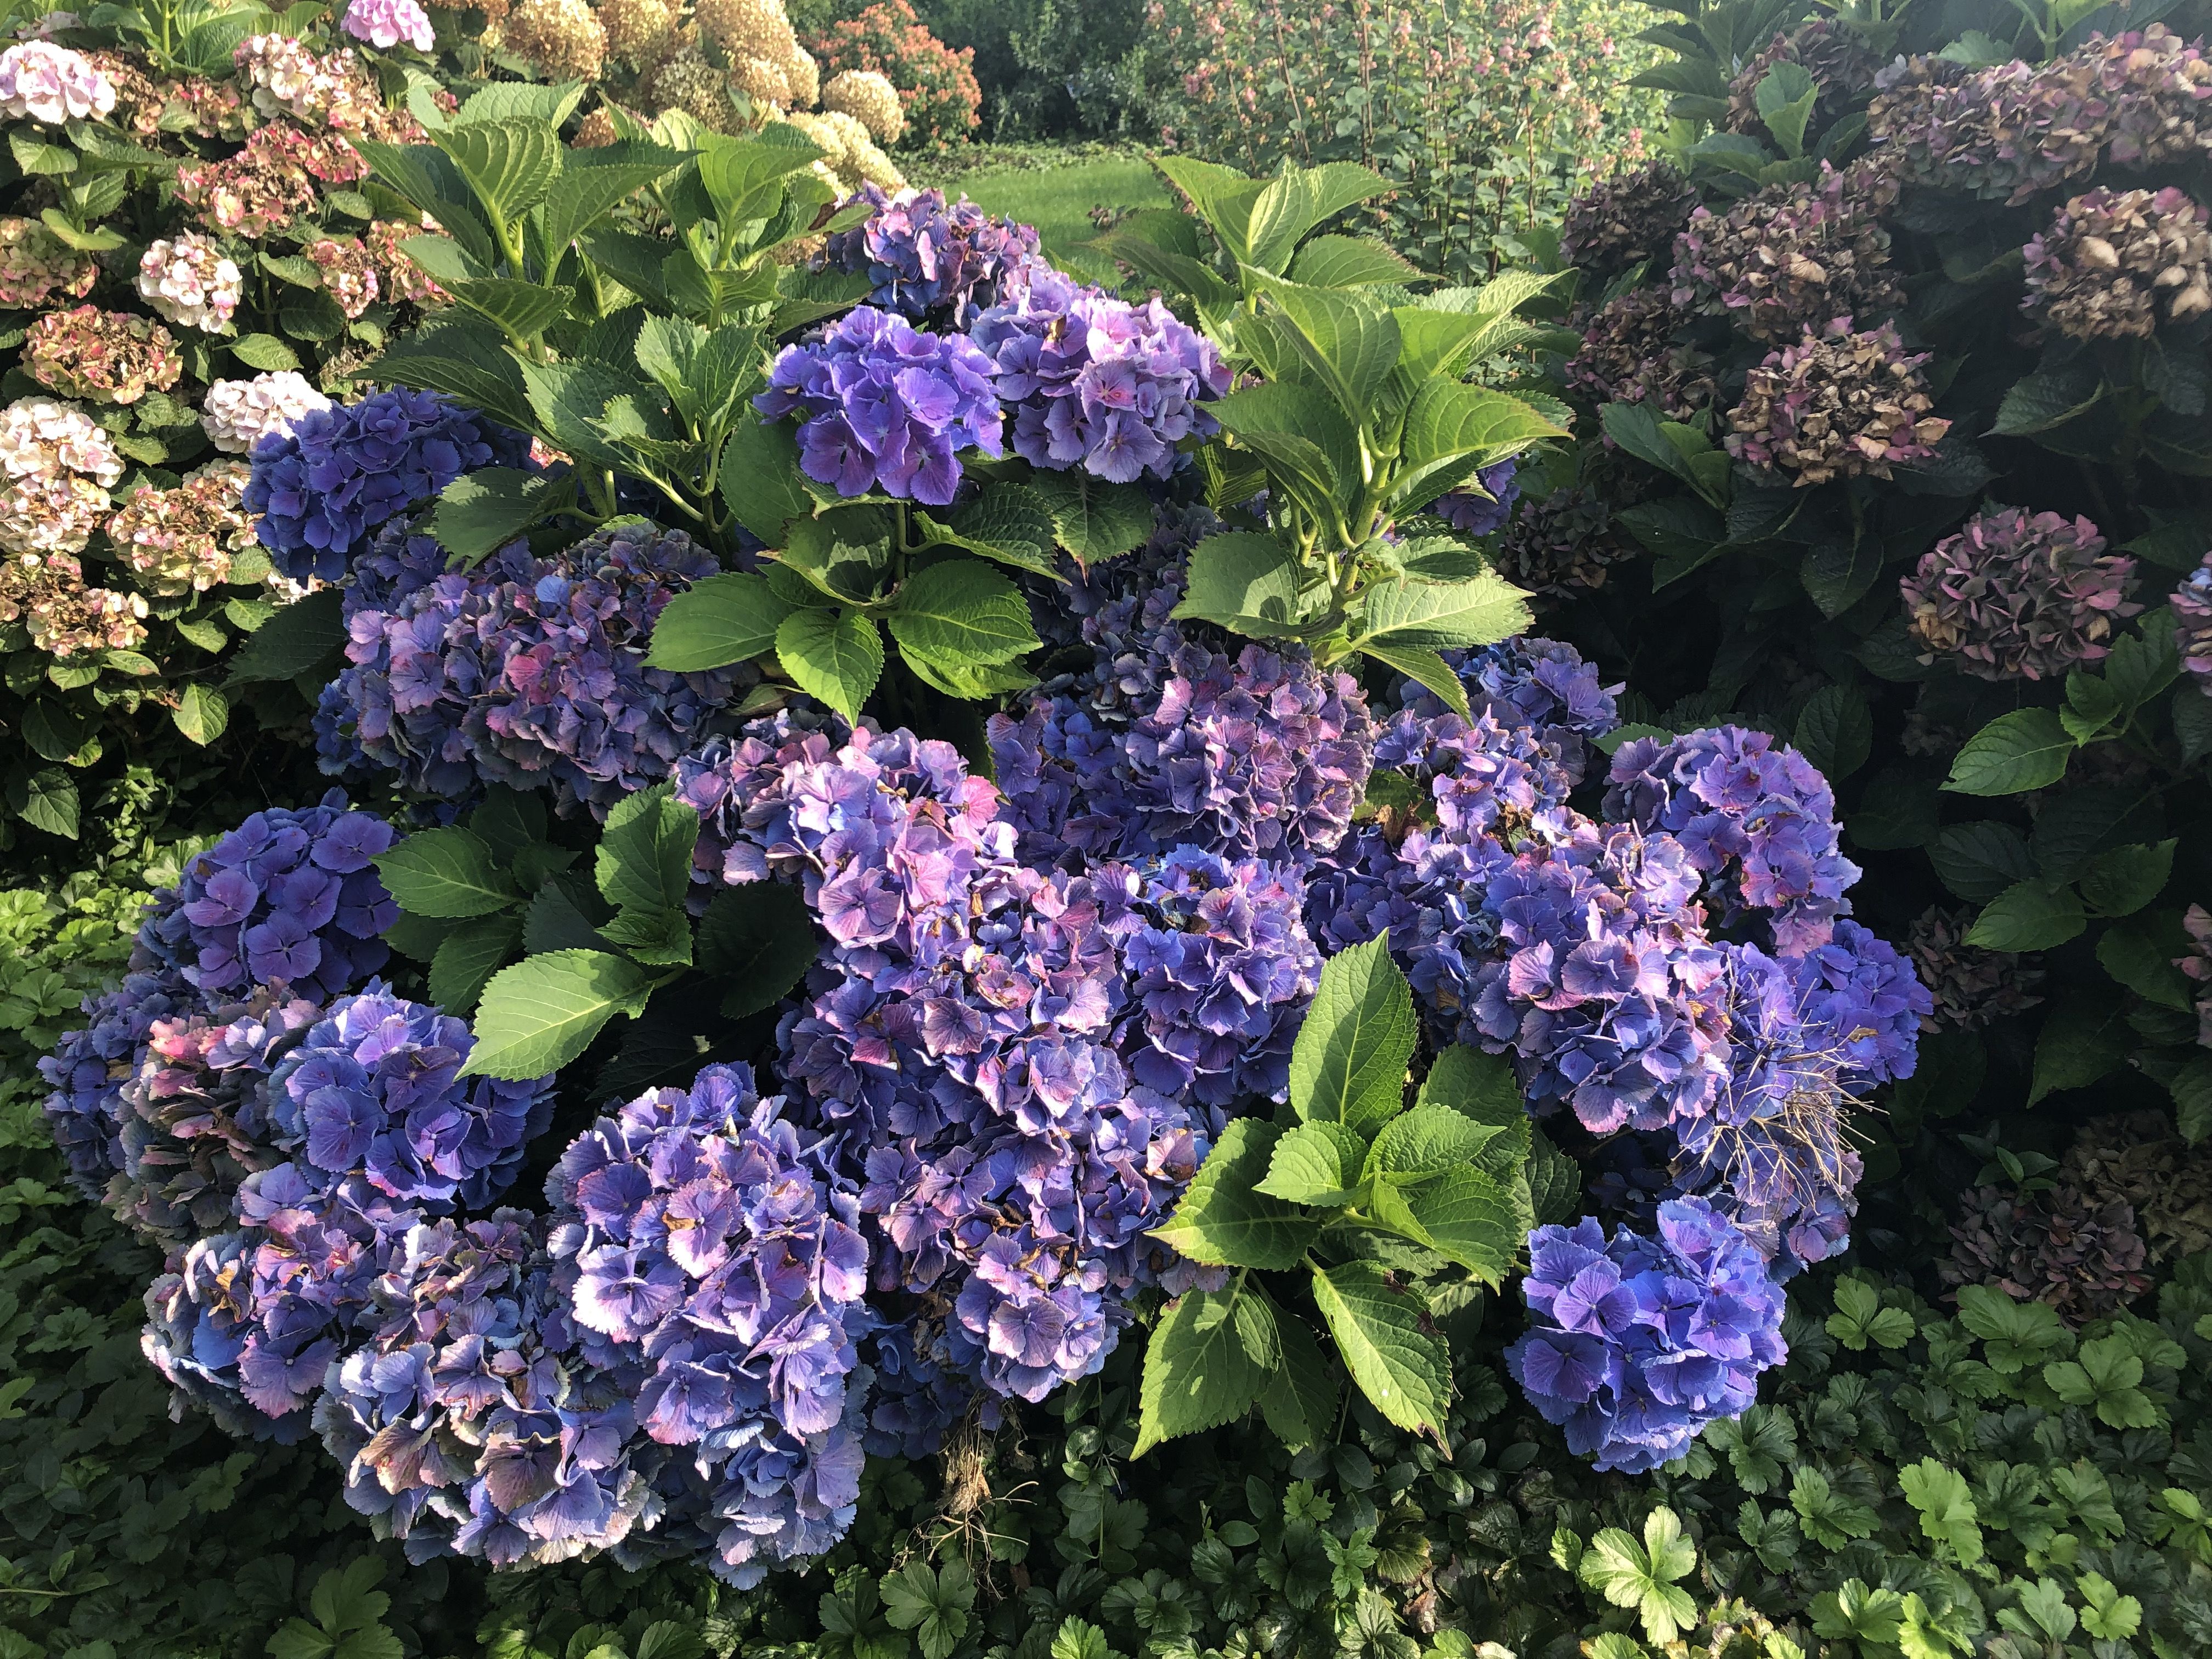 images/plants/hydrangea/hyd-magical-bluebells/hyd-magical-bluebells-0005.jpg